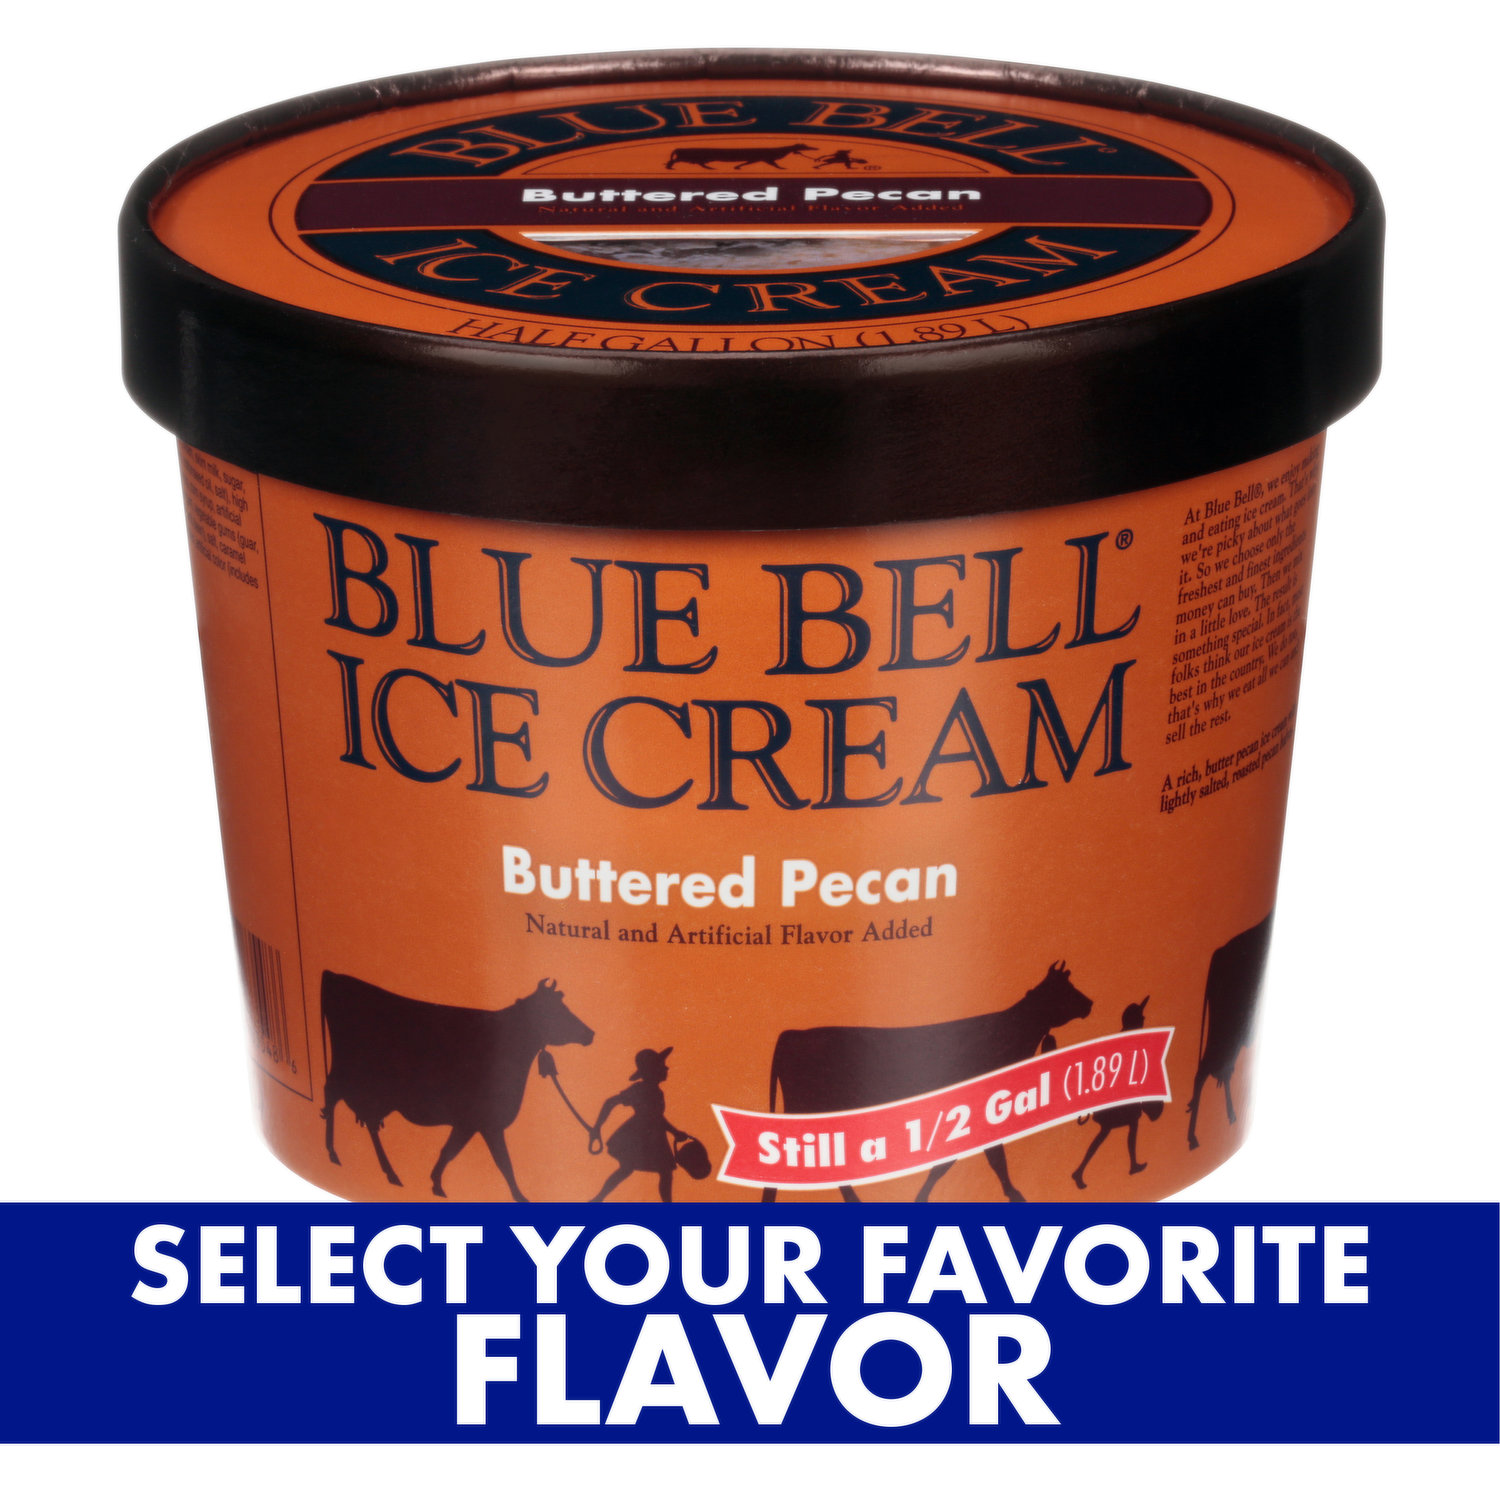 Can You Guess What the Top 10 Half Gallon Ice Cream Flavors Are